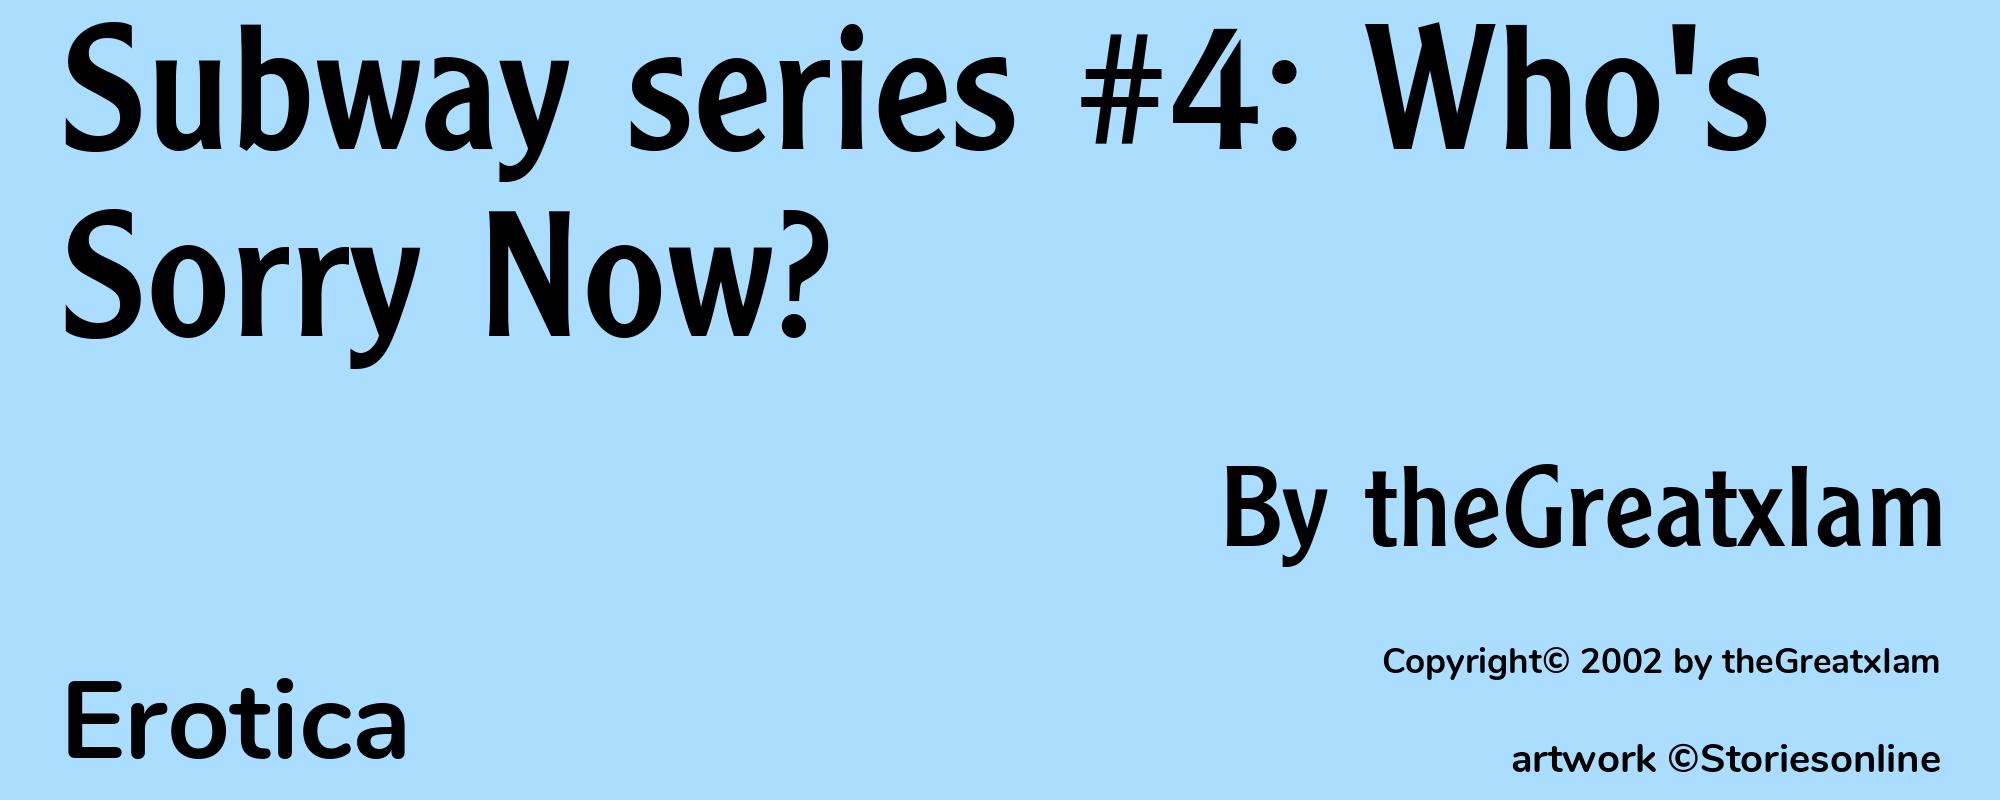 Subway series #4: Who's Sorry Now? - Cover